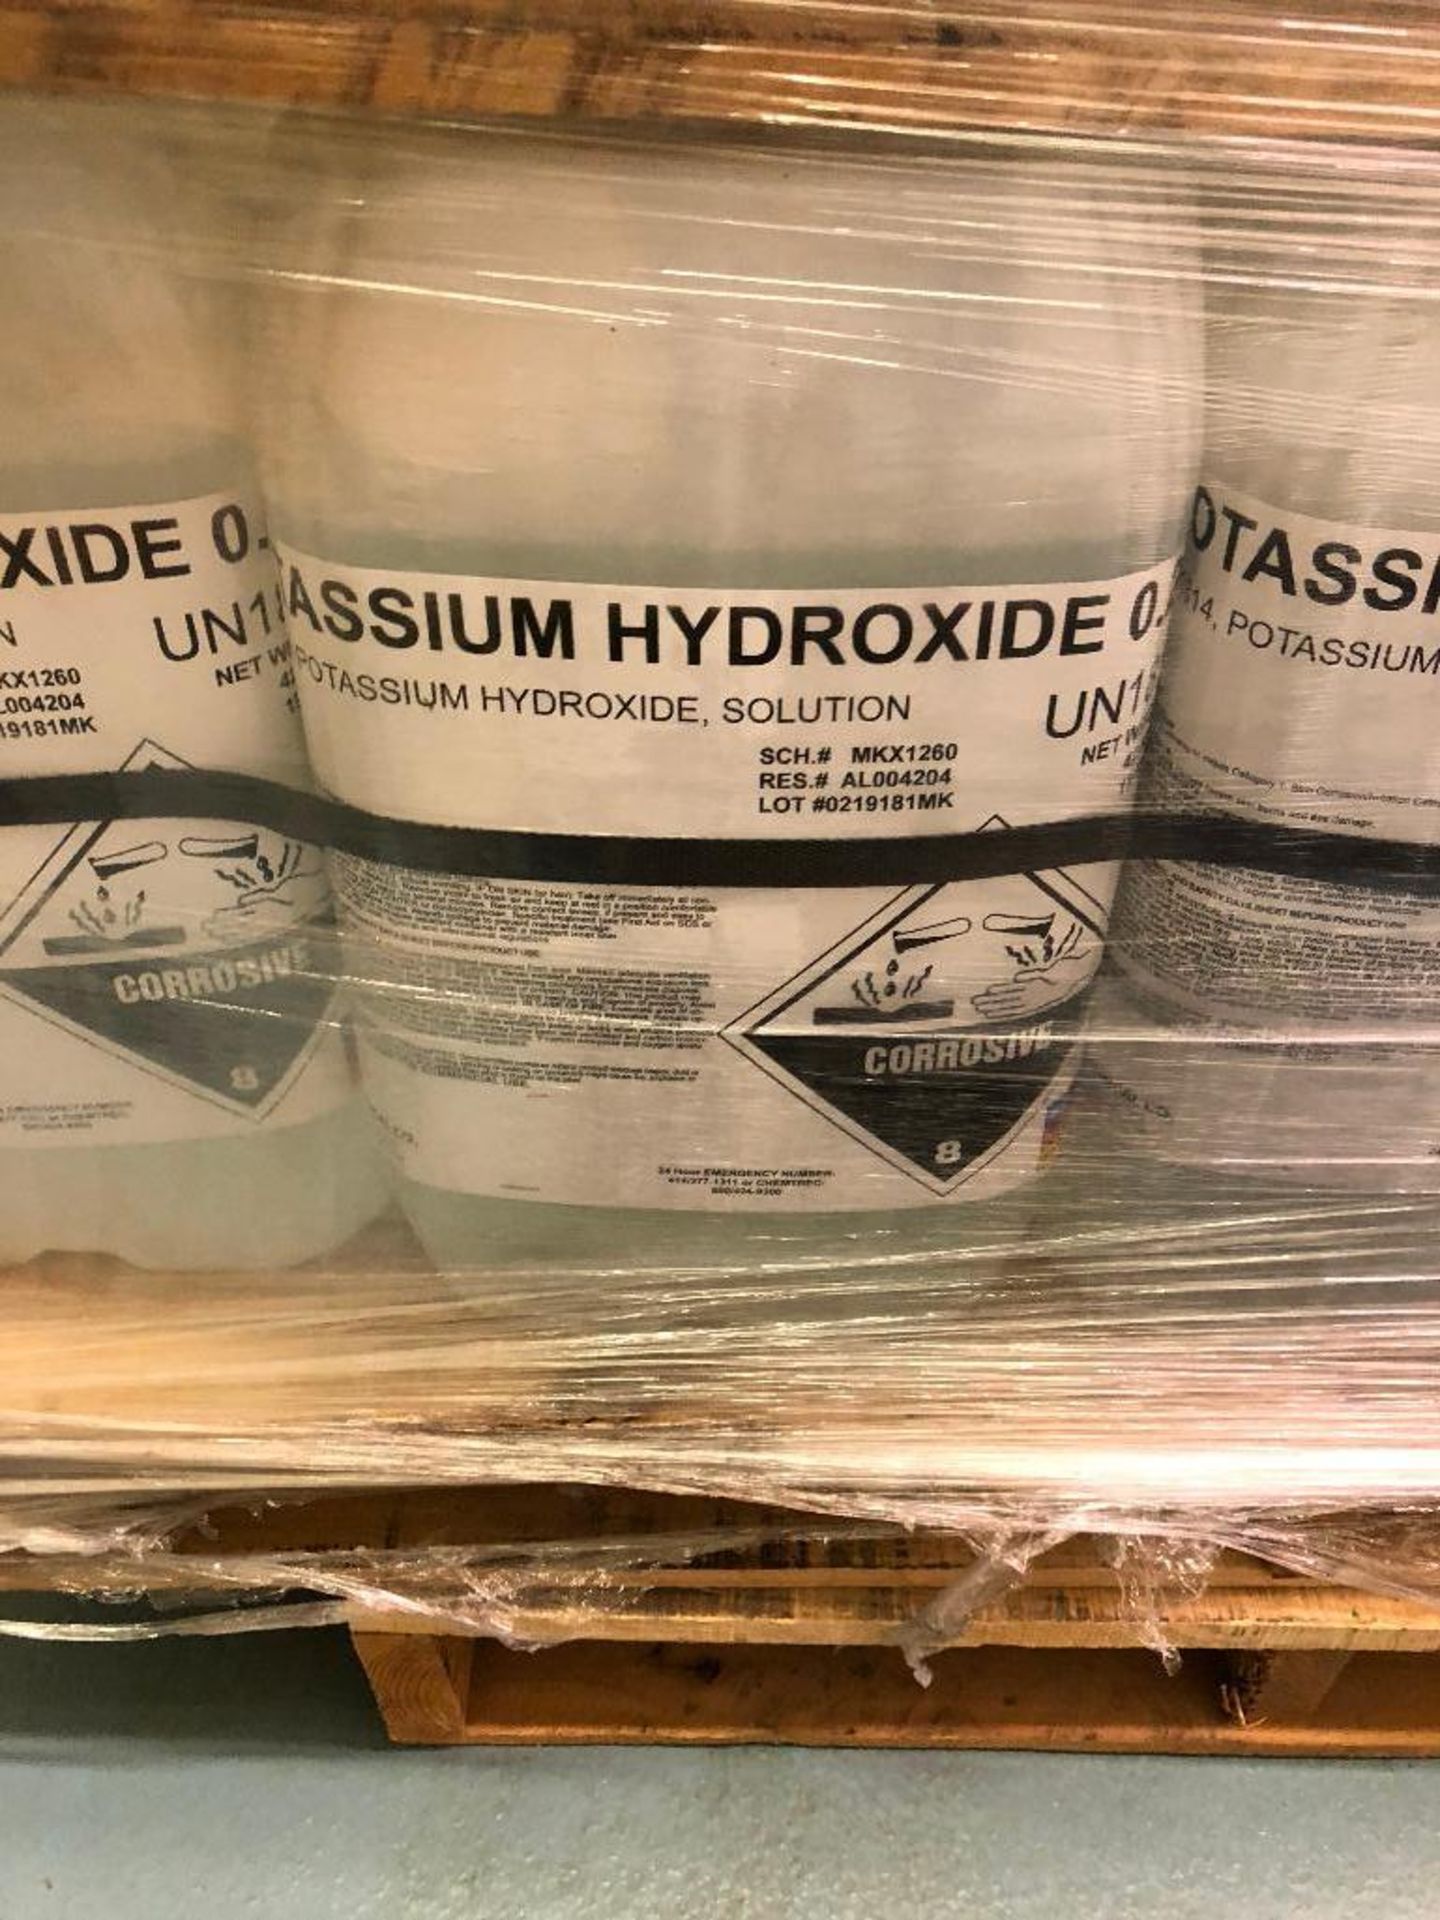 DESCRIPTION: (25) CONTAINERS OF POTASSIUM HYDROXIDE SOLUTION SIZE: 5 GALLON LOCATION: BACK BAY THIS - Image 3 of 3